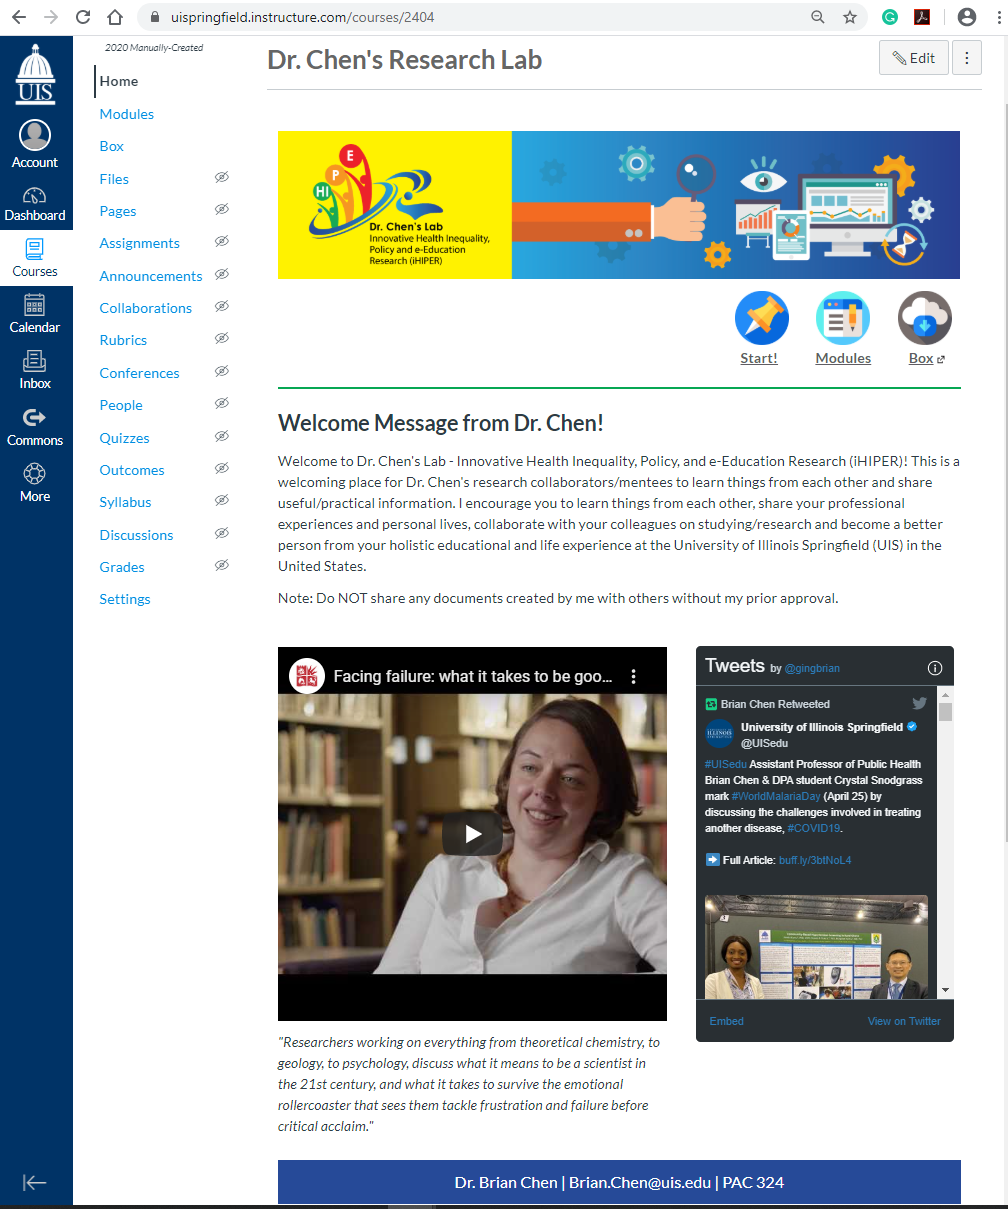 A Twitter Widget is embedded into Course Home Page. An actual Twitter embedded coding is saved as an Html file that I upload to the “Files” and then iframe in a Page. I use Twitter primarily to find resources about research articles and trends to share with my research mentees.